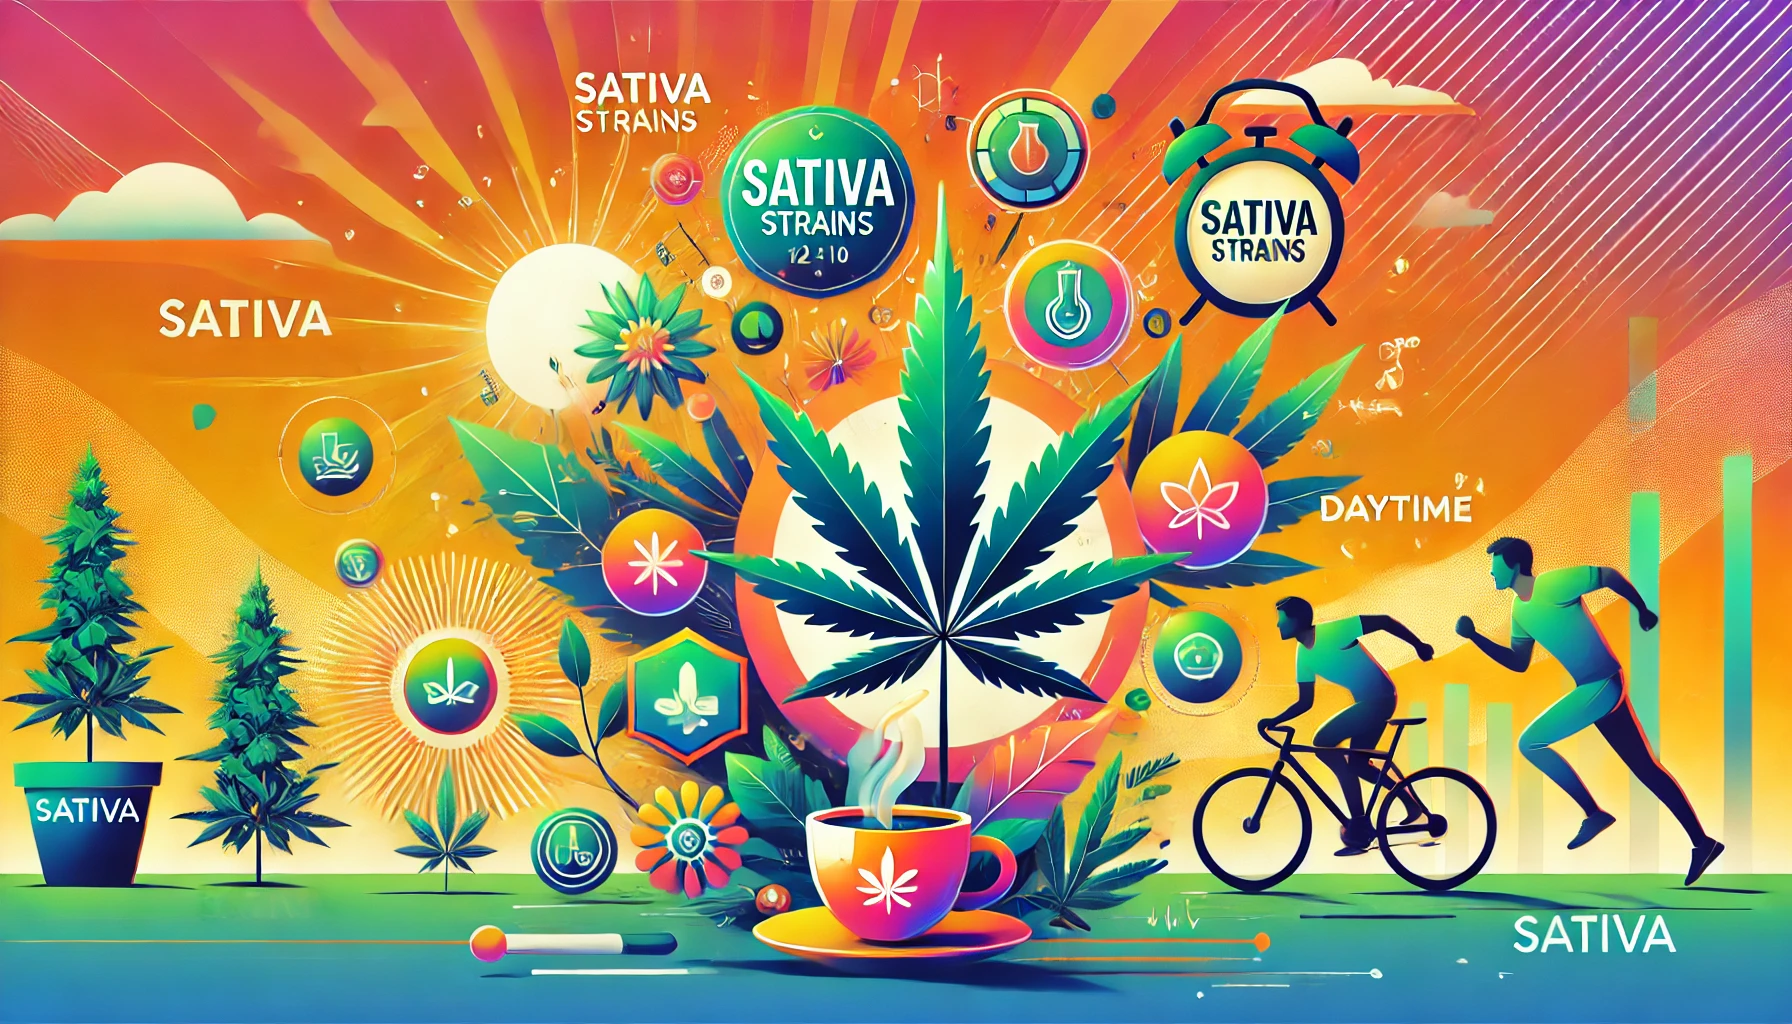 Sativa Strains are Perfect for Daytime Use